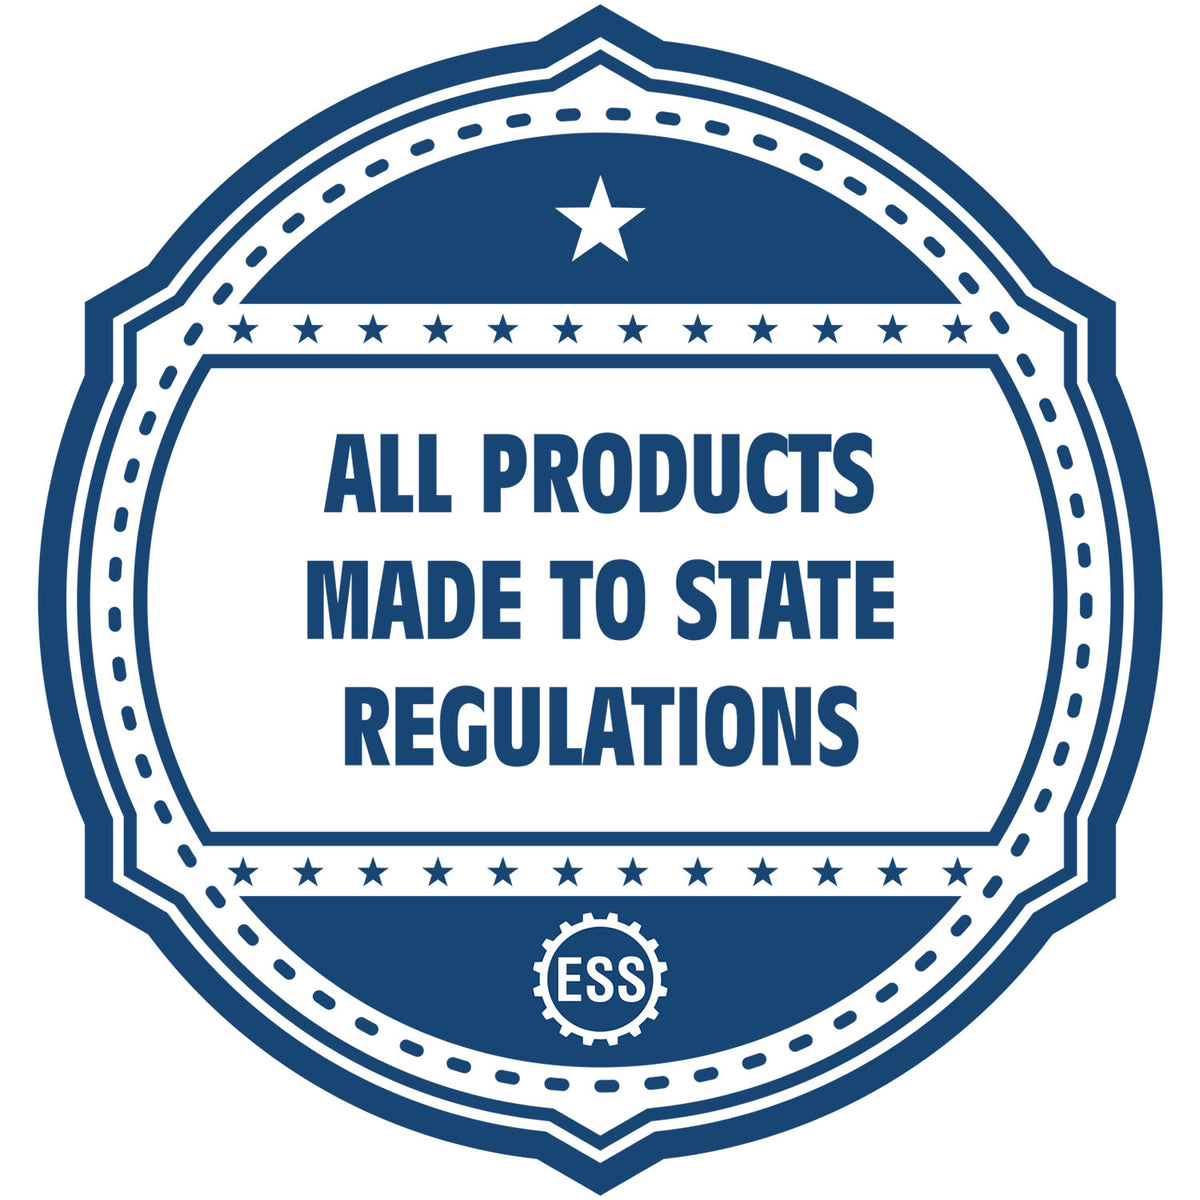 An icon or badge element for the Premium MaxLight Pre-Inked Arizona Engineering Stamp showing that this product is made in compliance with state regulations.